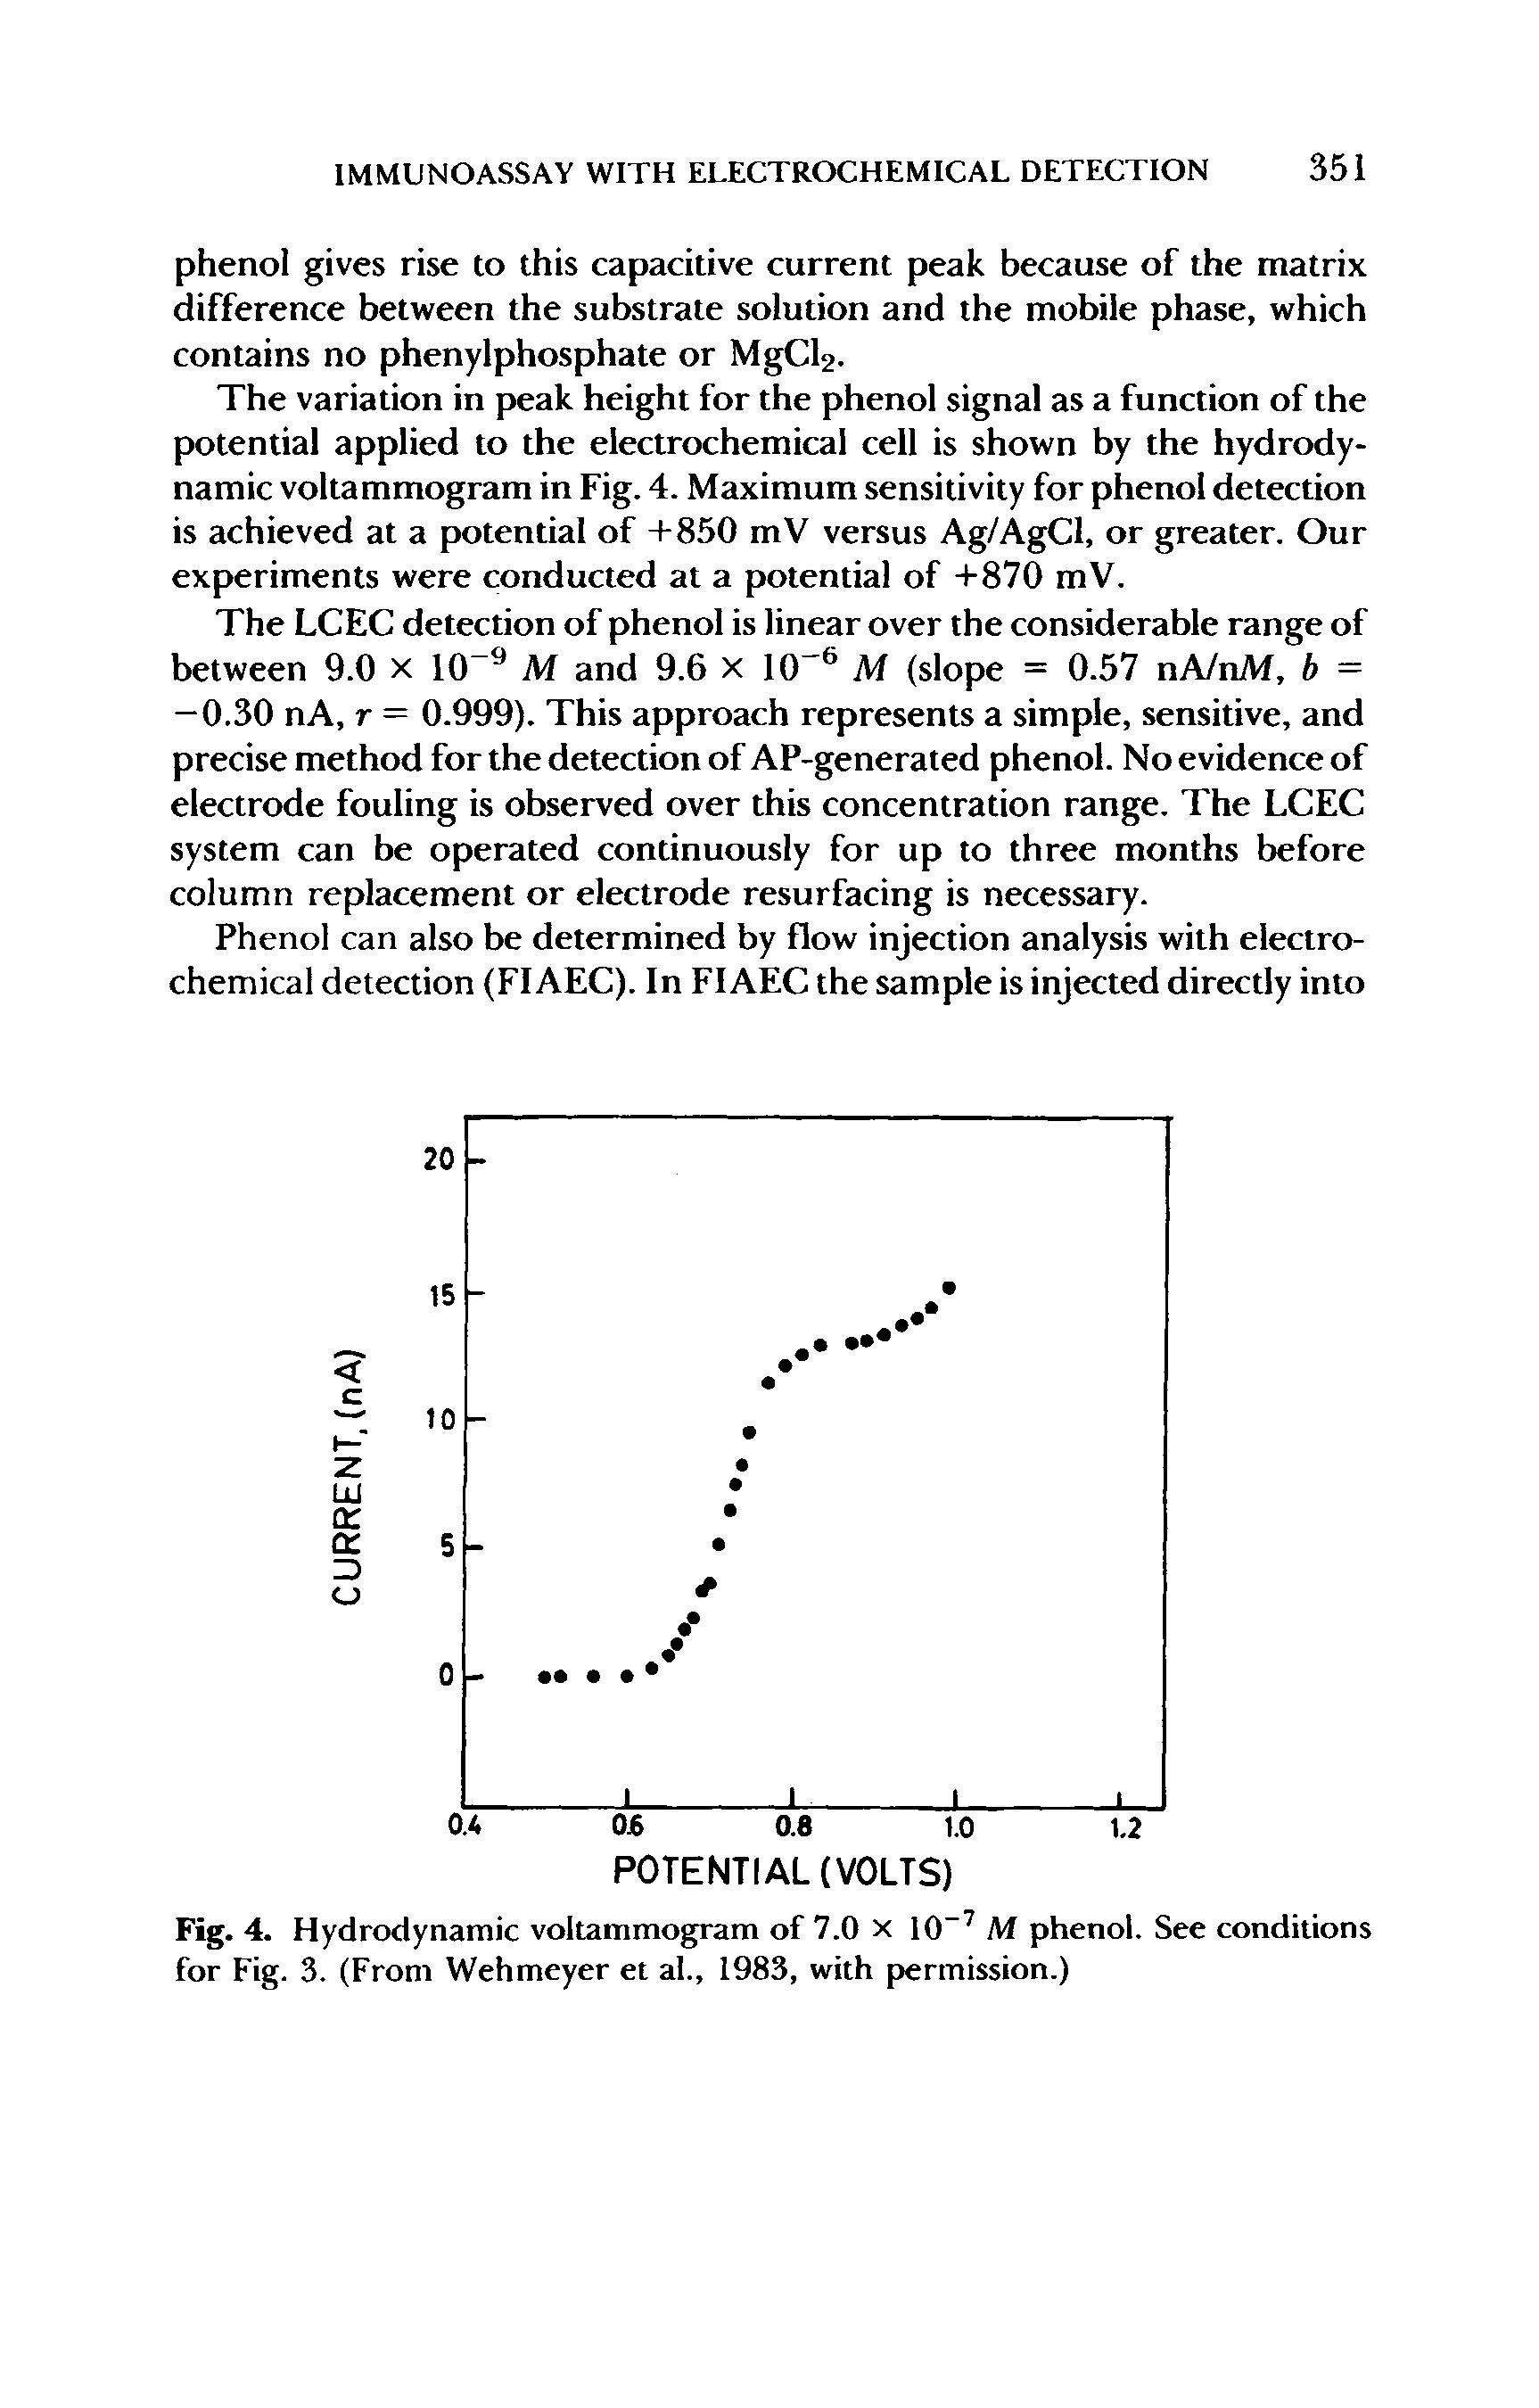 Fig. 4. Hydrodynamic voltammogram of 7.0 x 10 M phenol. See conditions for Fig. 3. (From Wehmeyer et al., 1983, with permission.)...